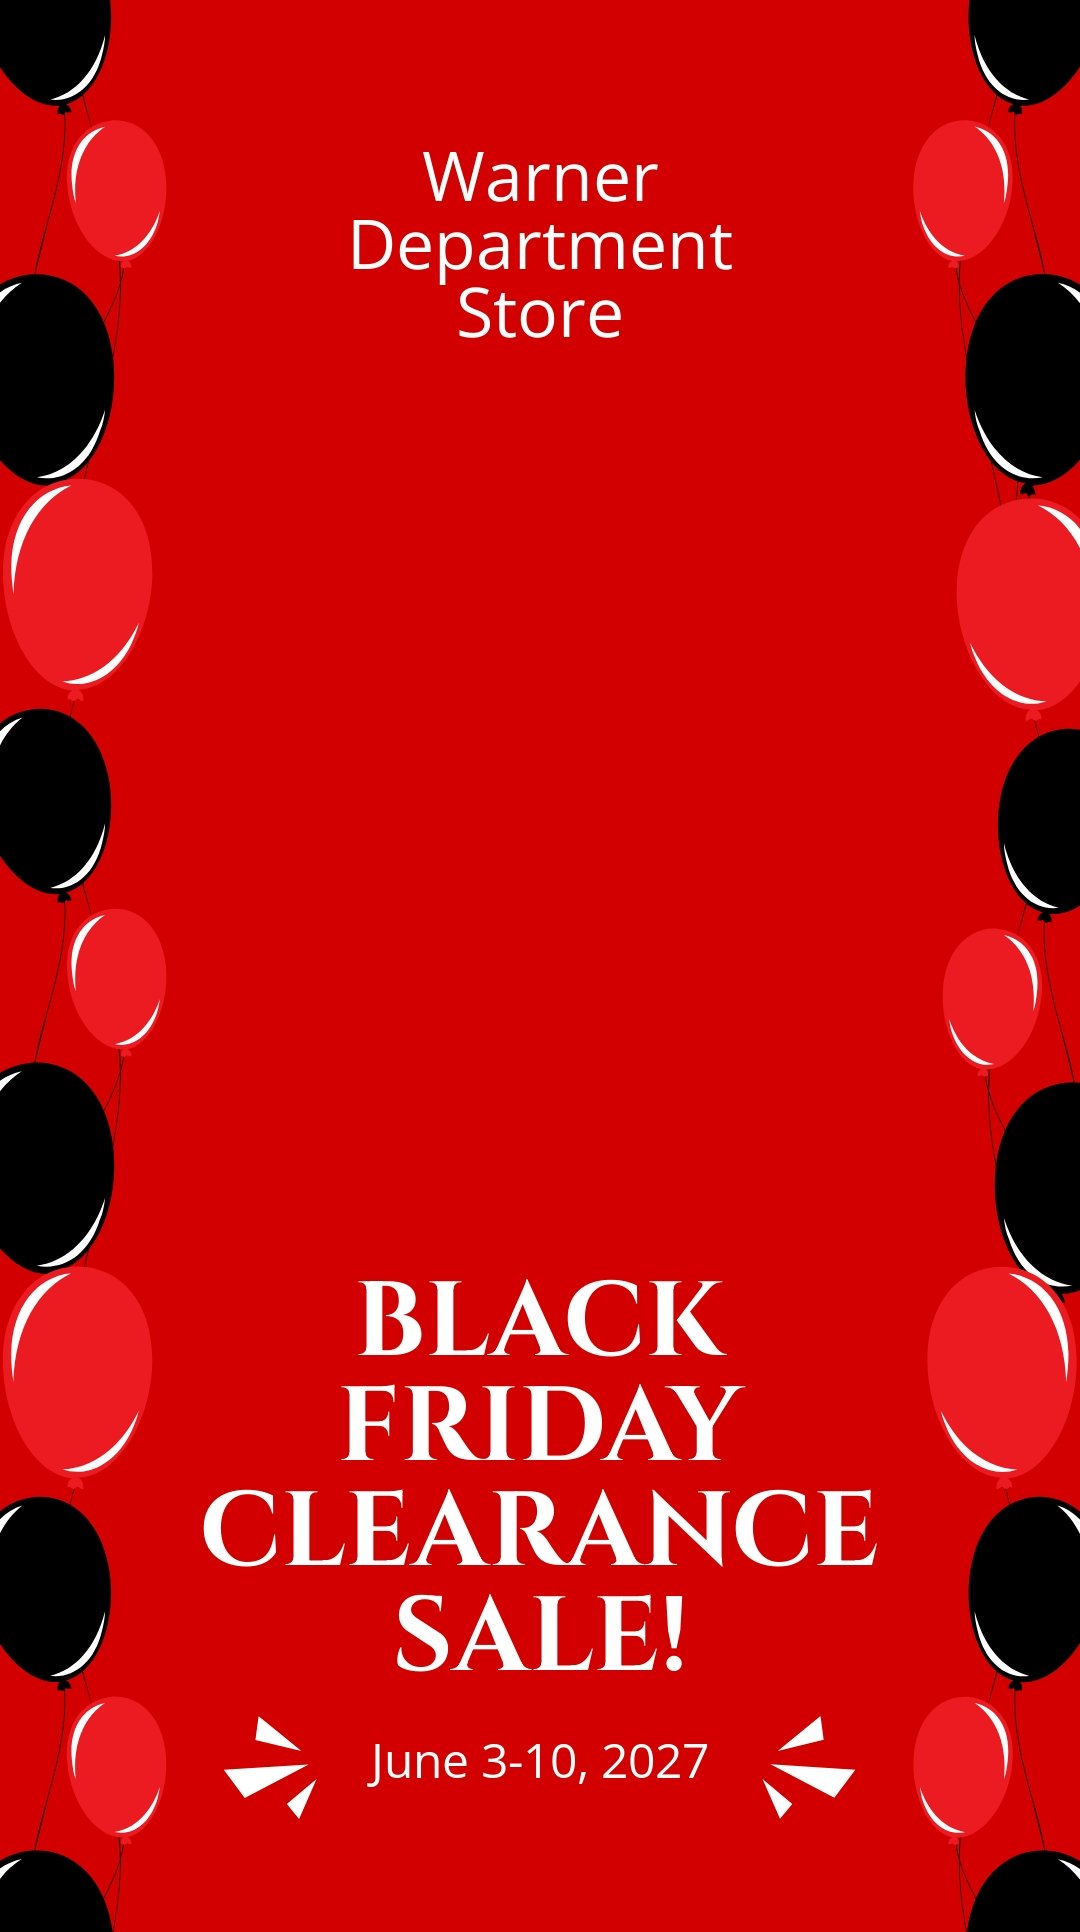 Black Friday Clearance Sale Snapchat Geofilter